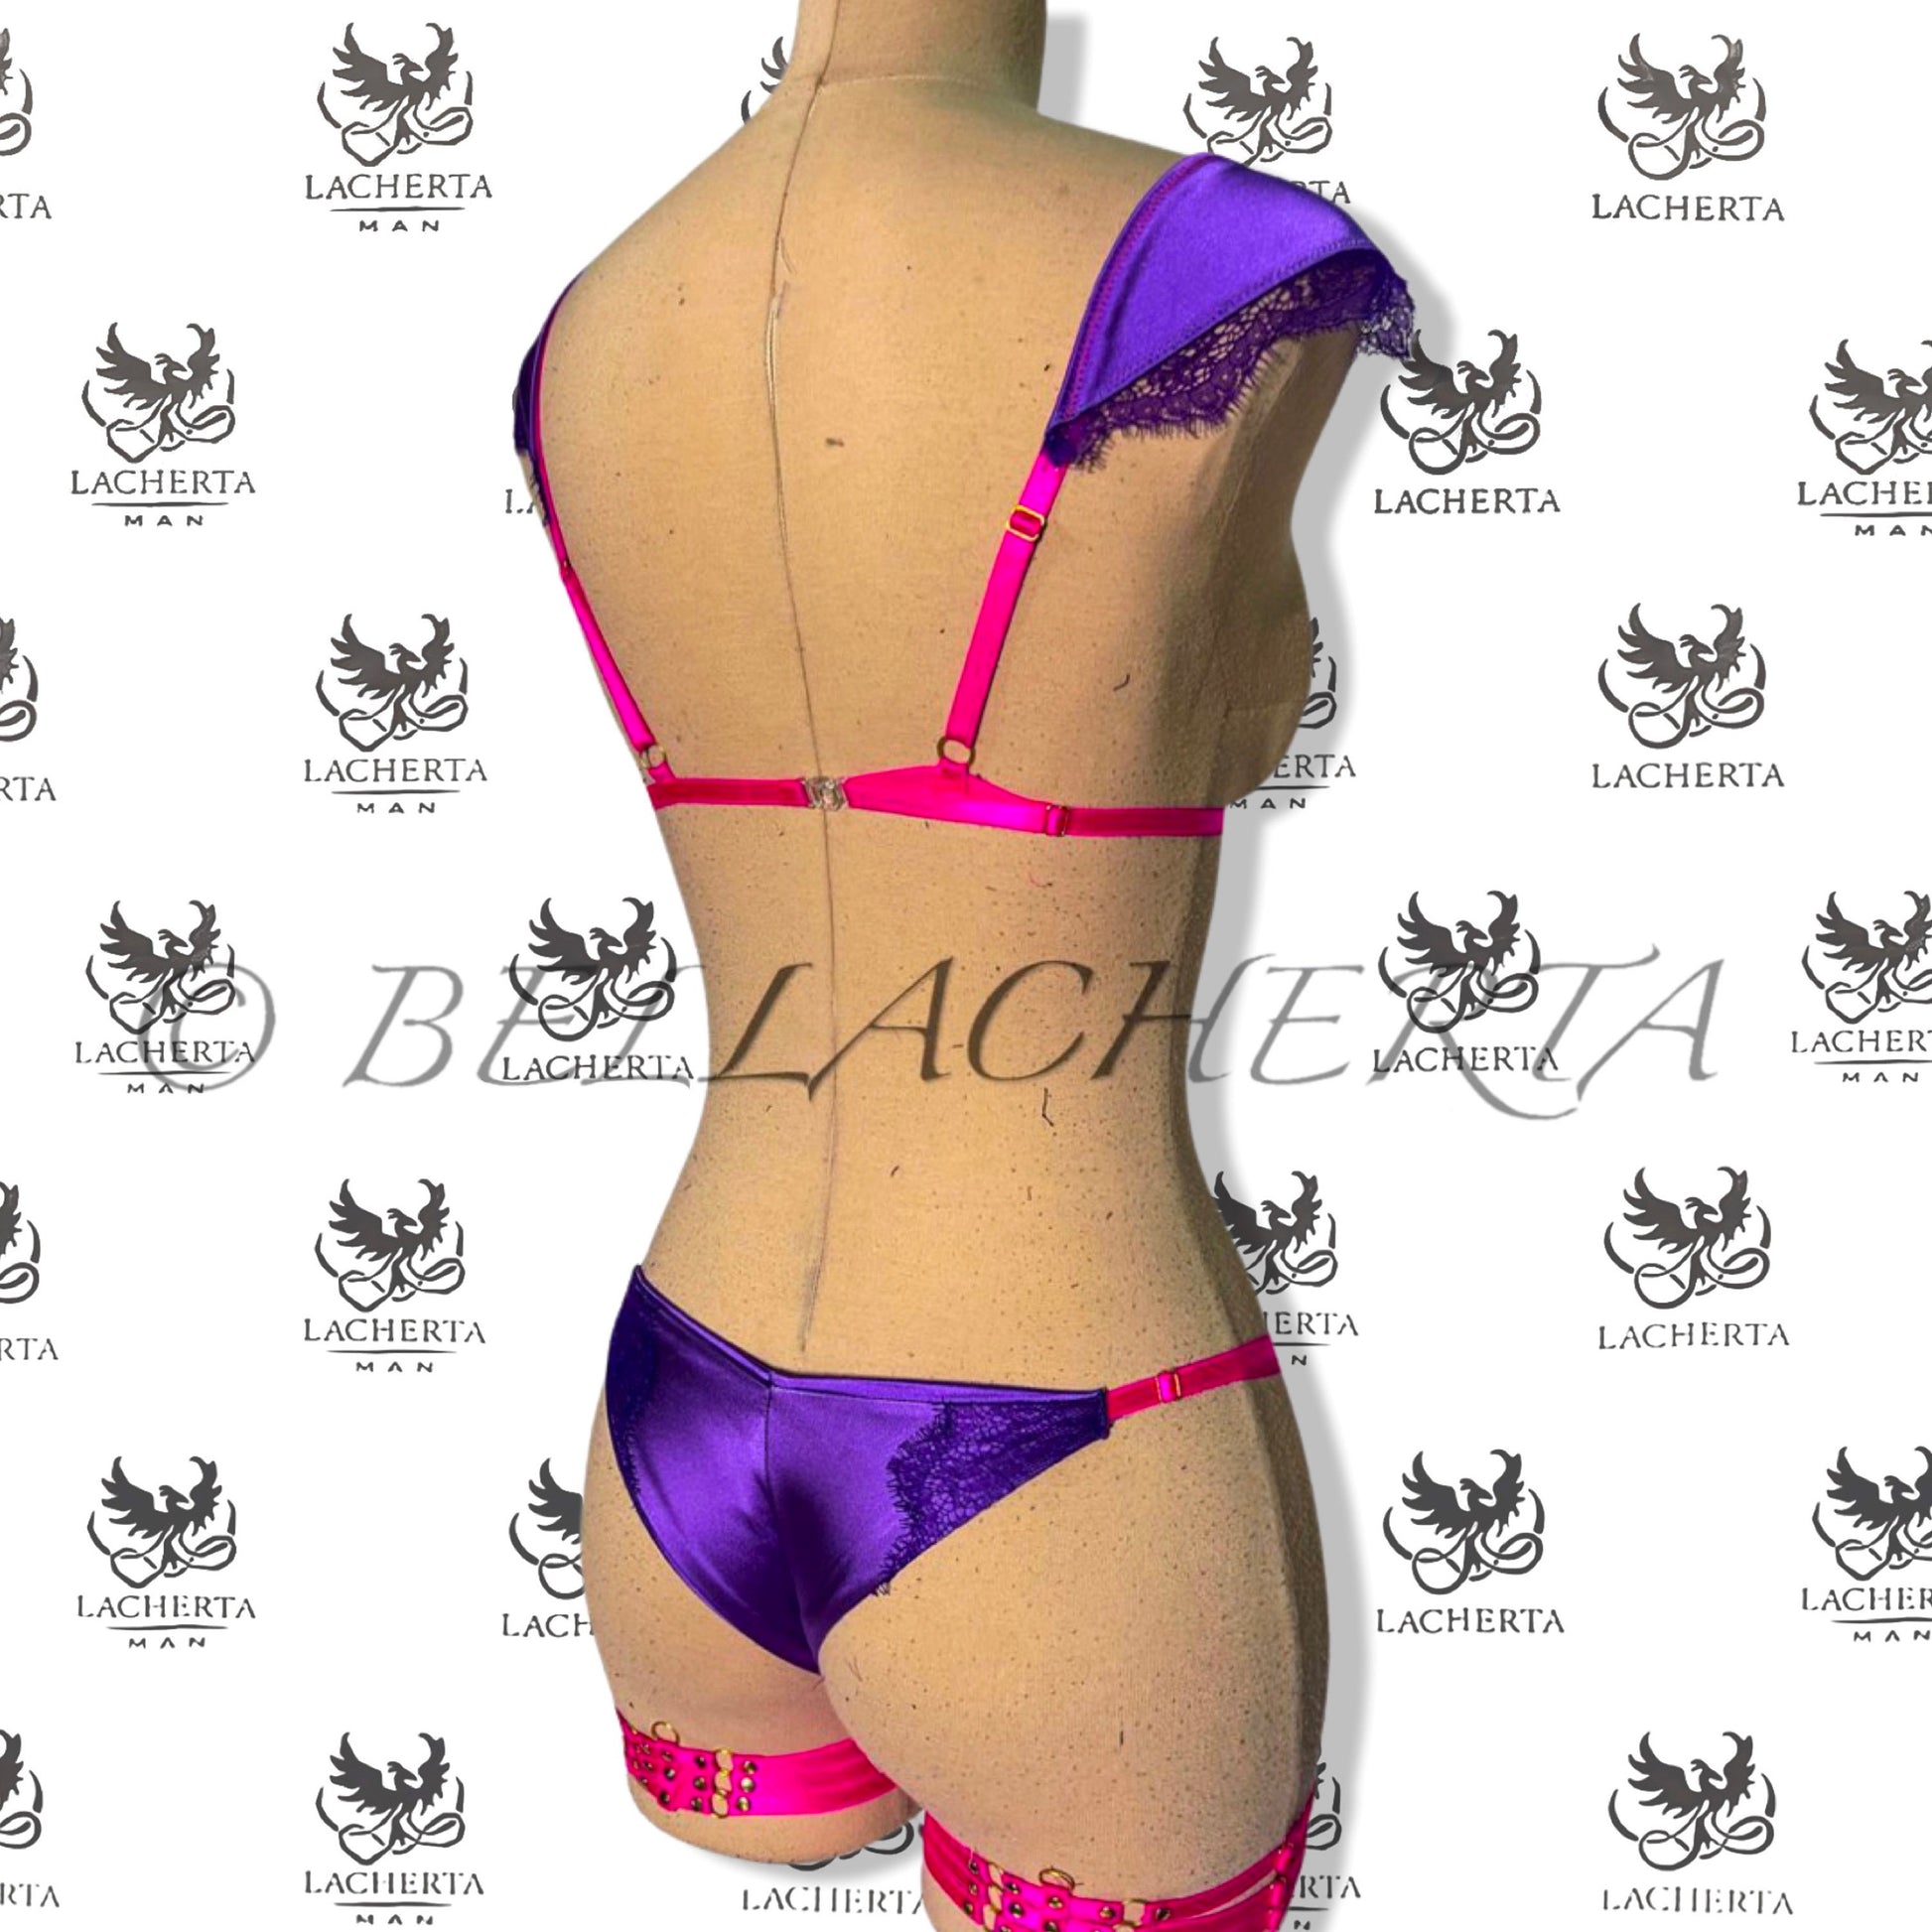 Back-tie Corset with Decorative Shoulder Harness, Matching Panty and Leg Garters